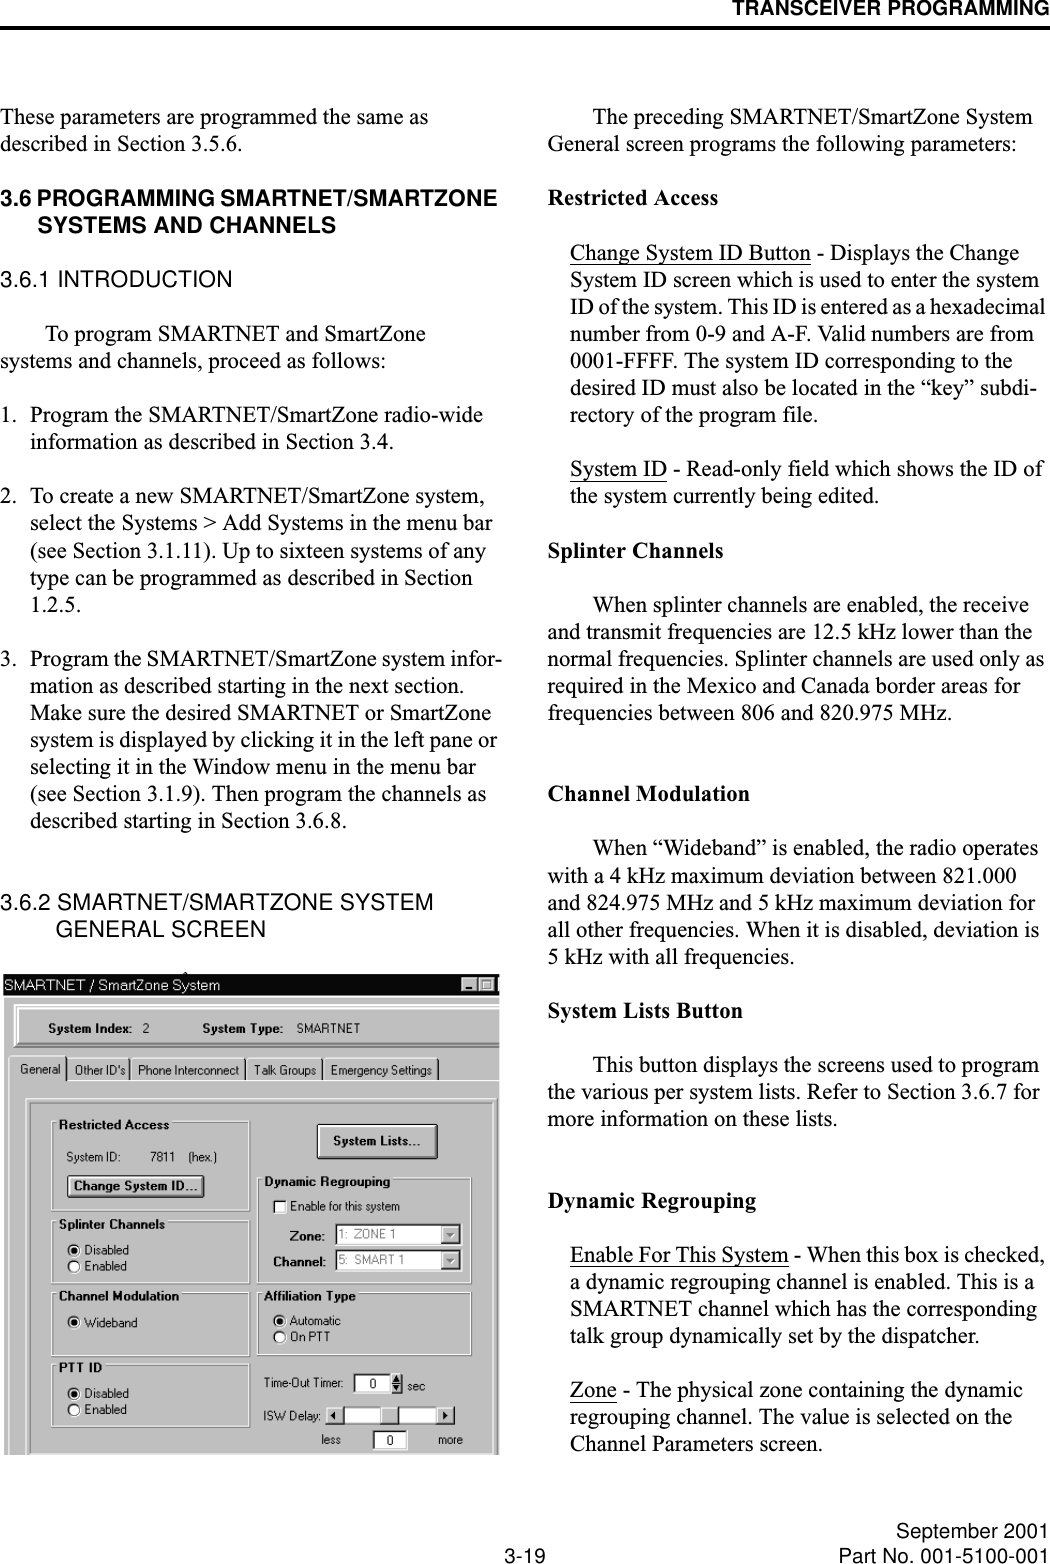 TRANSCEIVER PROGRAMMING3-19 September 2001Part No. 001-5100-001These parameters are programmed the same as described in Section 3.5.6.3.6 PROGRAMMING SMARTNET/SMARTZONE SYSTEMS AND CHANNELS3.6.1 INTRODUCTIONTo program SMARTNET and SmartZone systems and channels, proceed as follows: 1. Program the SMARTNET/SmartZone radio-wide information as described in Section 3.4. 2. To create a new SMARTNET/SmartZone system, select the Systems &gt; Add Systems in the menu bar (see Section 3.1.11). Up to sixteen systems of any type can be programmed as described in Section 1.2.5.3. Program the SMARTNET/SmartZone system infor-mation as described starting in the next section. Make sure the desired SMARTNET or SmartZone system is displayed by clicking it in the left pane or selecting it in the Window menu in the menu bar (see Section 3.1.9). Then program the channels as described starting in Section 3.6.8. 3.6.2 SMARTNET/SMARTZONE SYSTEM GENERAL SCREENThe preceding SMARTNET/SmartZone System General screen programs the following parameters:Restricted AccessChange System ID Button - Displays the Change System ID screen which is used to enter the system ID of the system. This ID is entered as a hexadecimal number from 0-9 and A-F. Valid numbers are from 0001-FFFF. The system ID corresponding to the desired ID must also be located in the “key” subdi-rectory of the program file.System ID - Read-only field which shows the ID of the system currently being edited.Splinter ChannelsWhen splinter channels are enabled, the receive and transmit frequencies are 12.5 kHz lower than the normal frequencies. Splinter channels are used only as required in the Mexico and Canada border areas for frequencies between 806 and 820.975 MHz.Channel ModulationWhen “Wideband” is enabled, the radio operates with a 4 kHz maximum deviation between 821.000 and 824.975 MHz and 5 kHz maximum deviation for all other frequencies. When it is disabled, deviation is 5 kHz with all frequencies.System Lists ButtonThis button displays the screens used to program the various per system lists. Refer to Section 3.6.7 for more information on these lists.Dynamic RegroupingEnable For This System - When this box is checked, a dynamic regrouping channel is enabled. This is a SMARTNET channel which has the corresponding talk group dynamically set by the dispatcher.Zone - The physical zone containing the dynamic regrouping channel. The value is selected on the Channel Parameters screen.